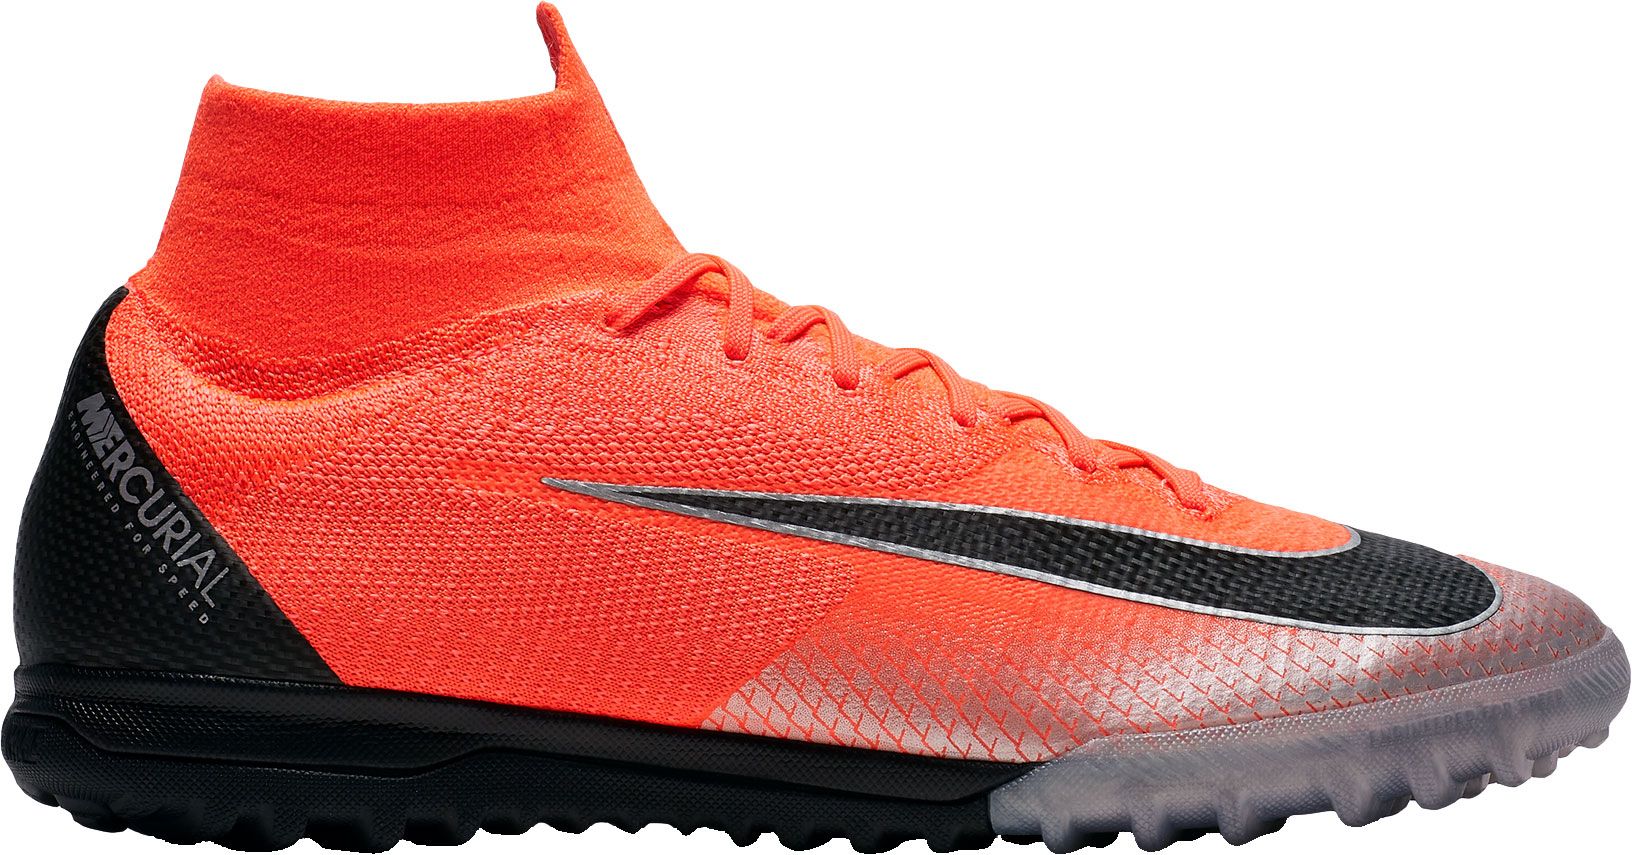 Nike Mercurial Superfly VI LVL UP CR7 Football Boots .